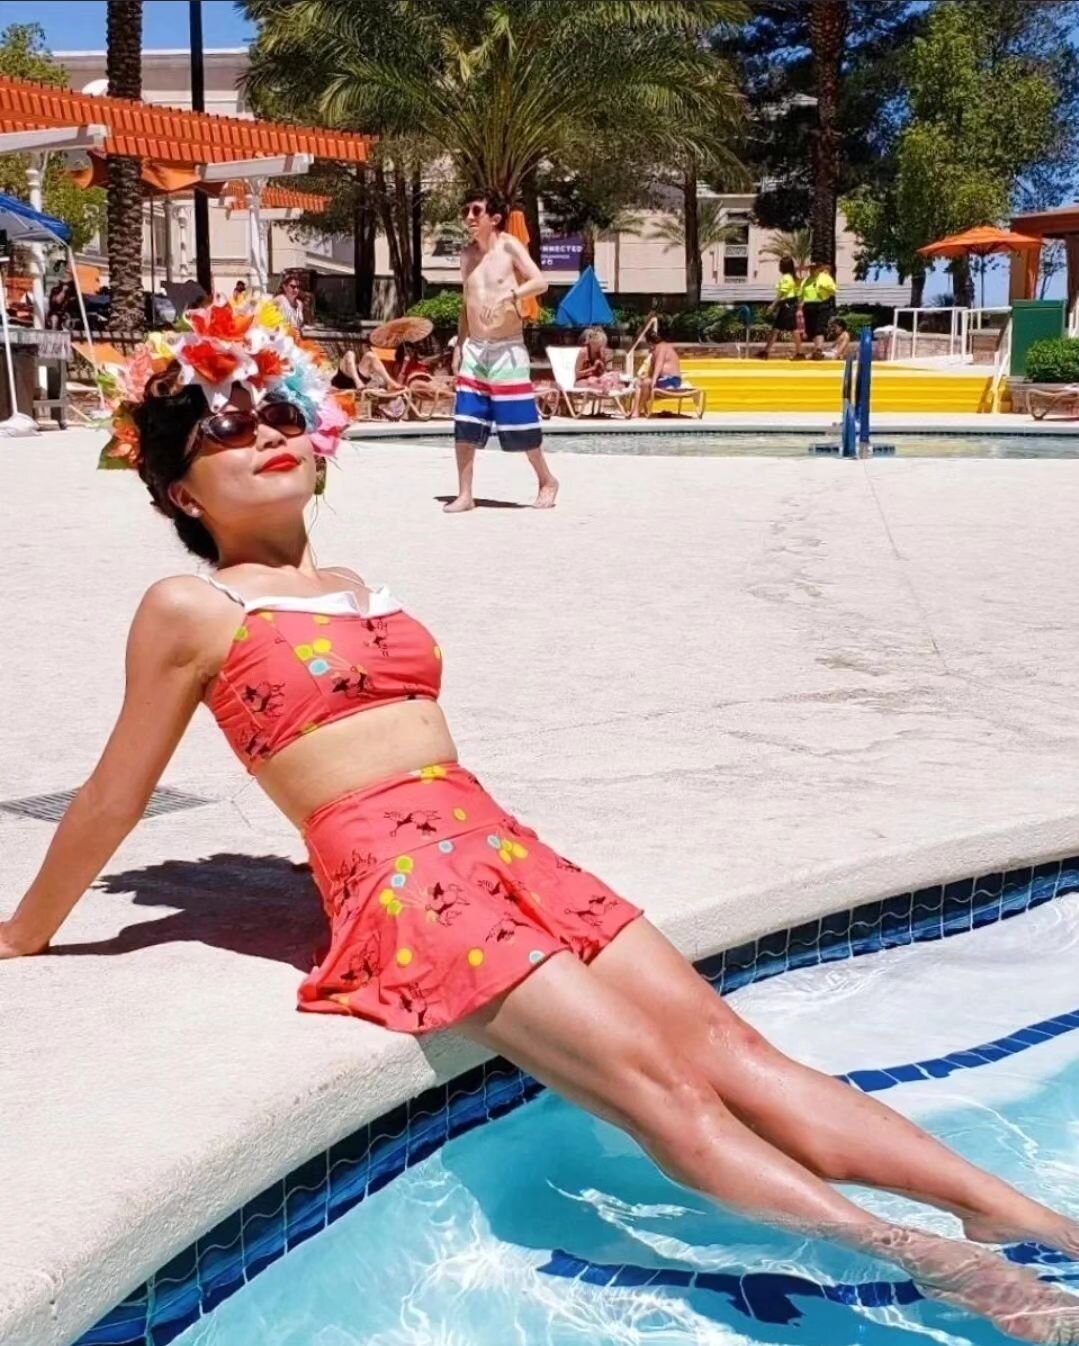 Saturday Sunshine 🌞  @koreanpinupgirl I looking fabulous poolside in our Pink poodle print skirted two piece! 💖🐩 Hope y'all are having a great weekend! 

#poolsidepinup #pinupgirl #vivalasvegas #viva2023 #vlv26 #pinupstyle #classy #vintageswimwear